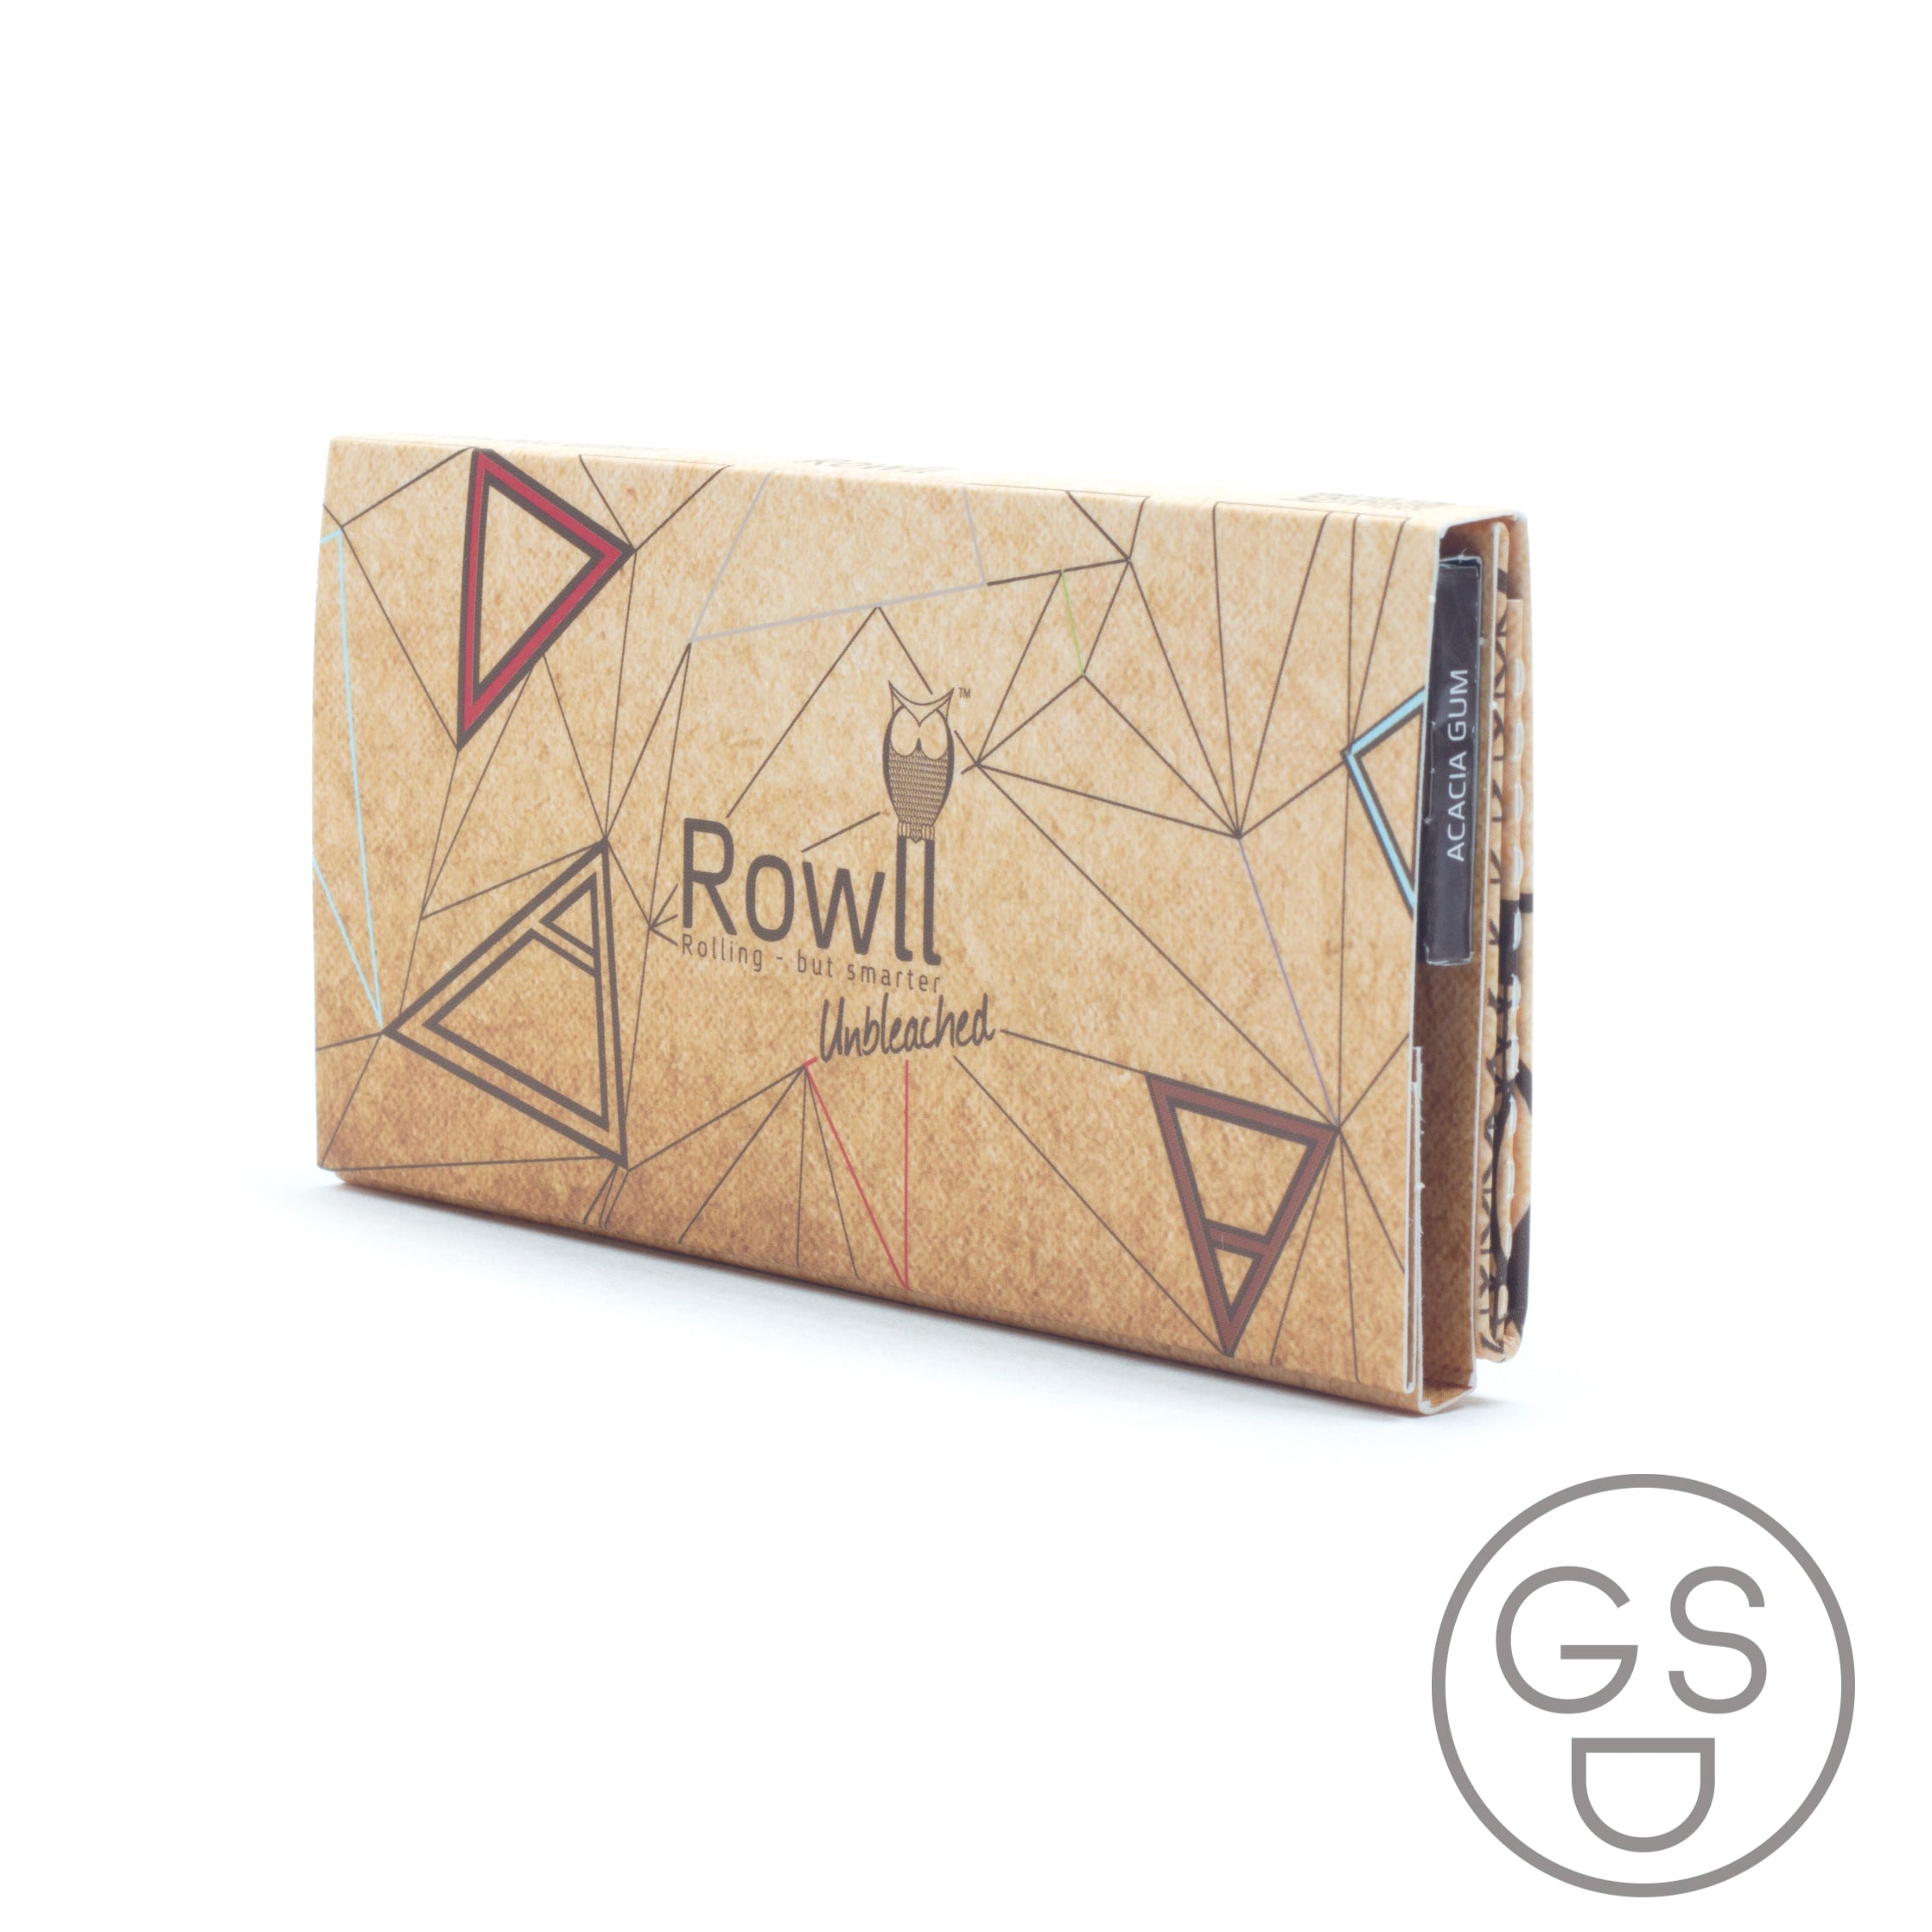 Rowll Rolling Papers - King Size Extra Slim/32 Leaves